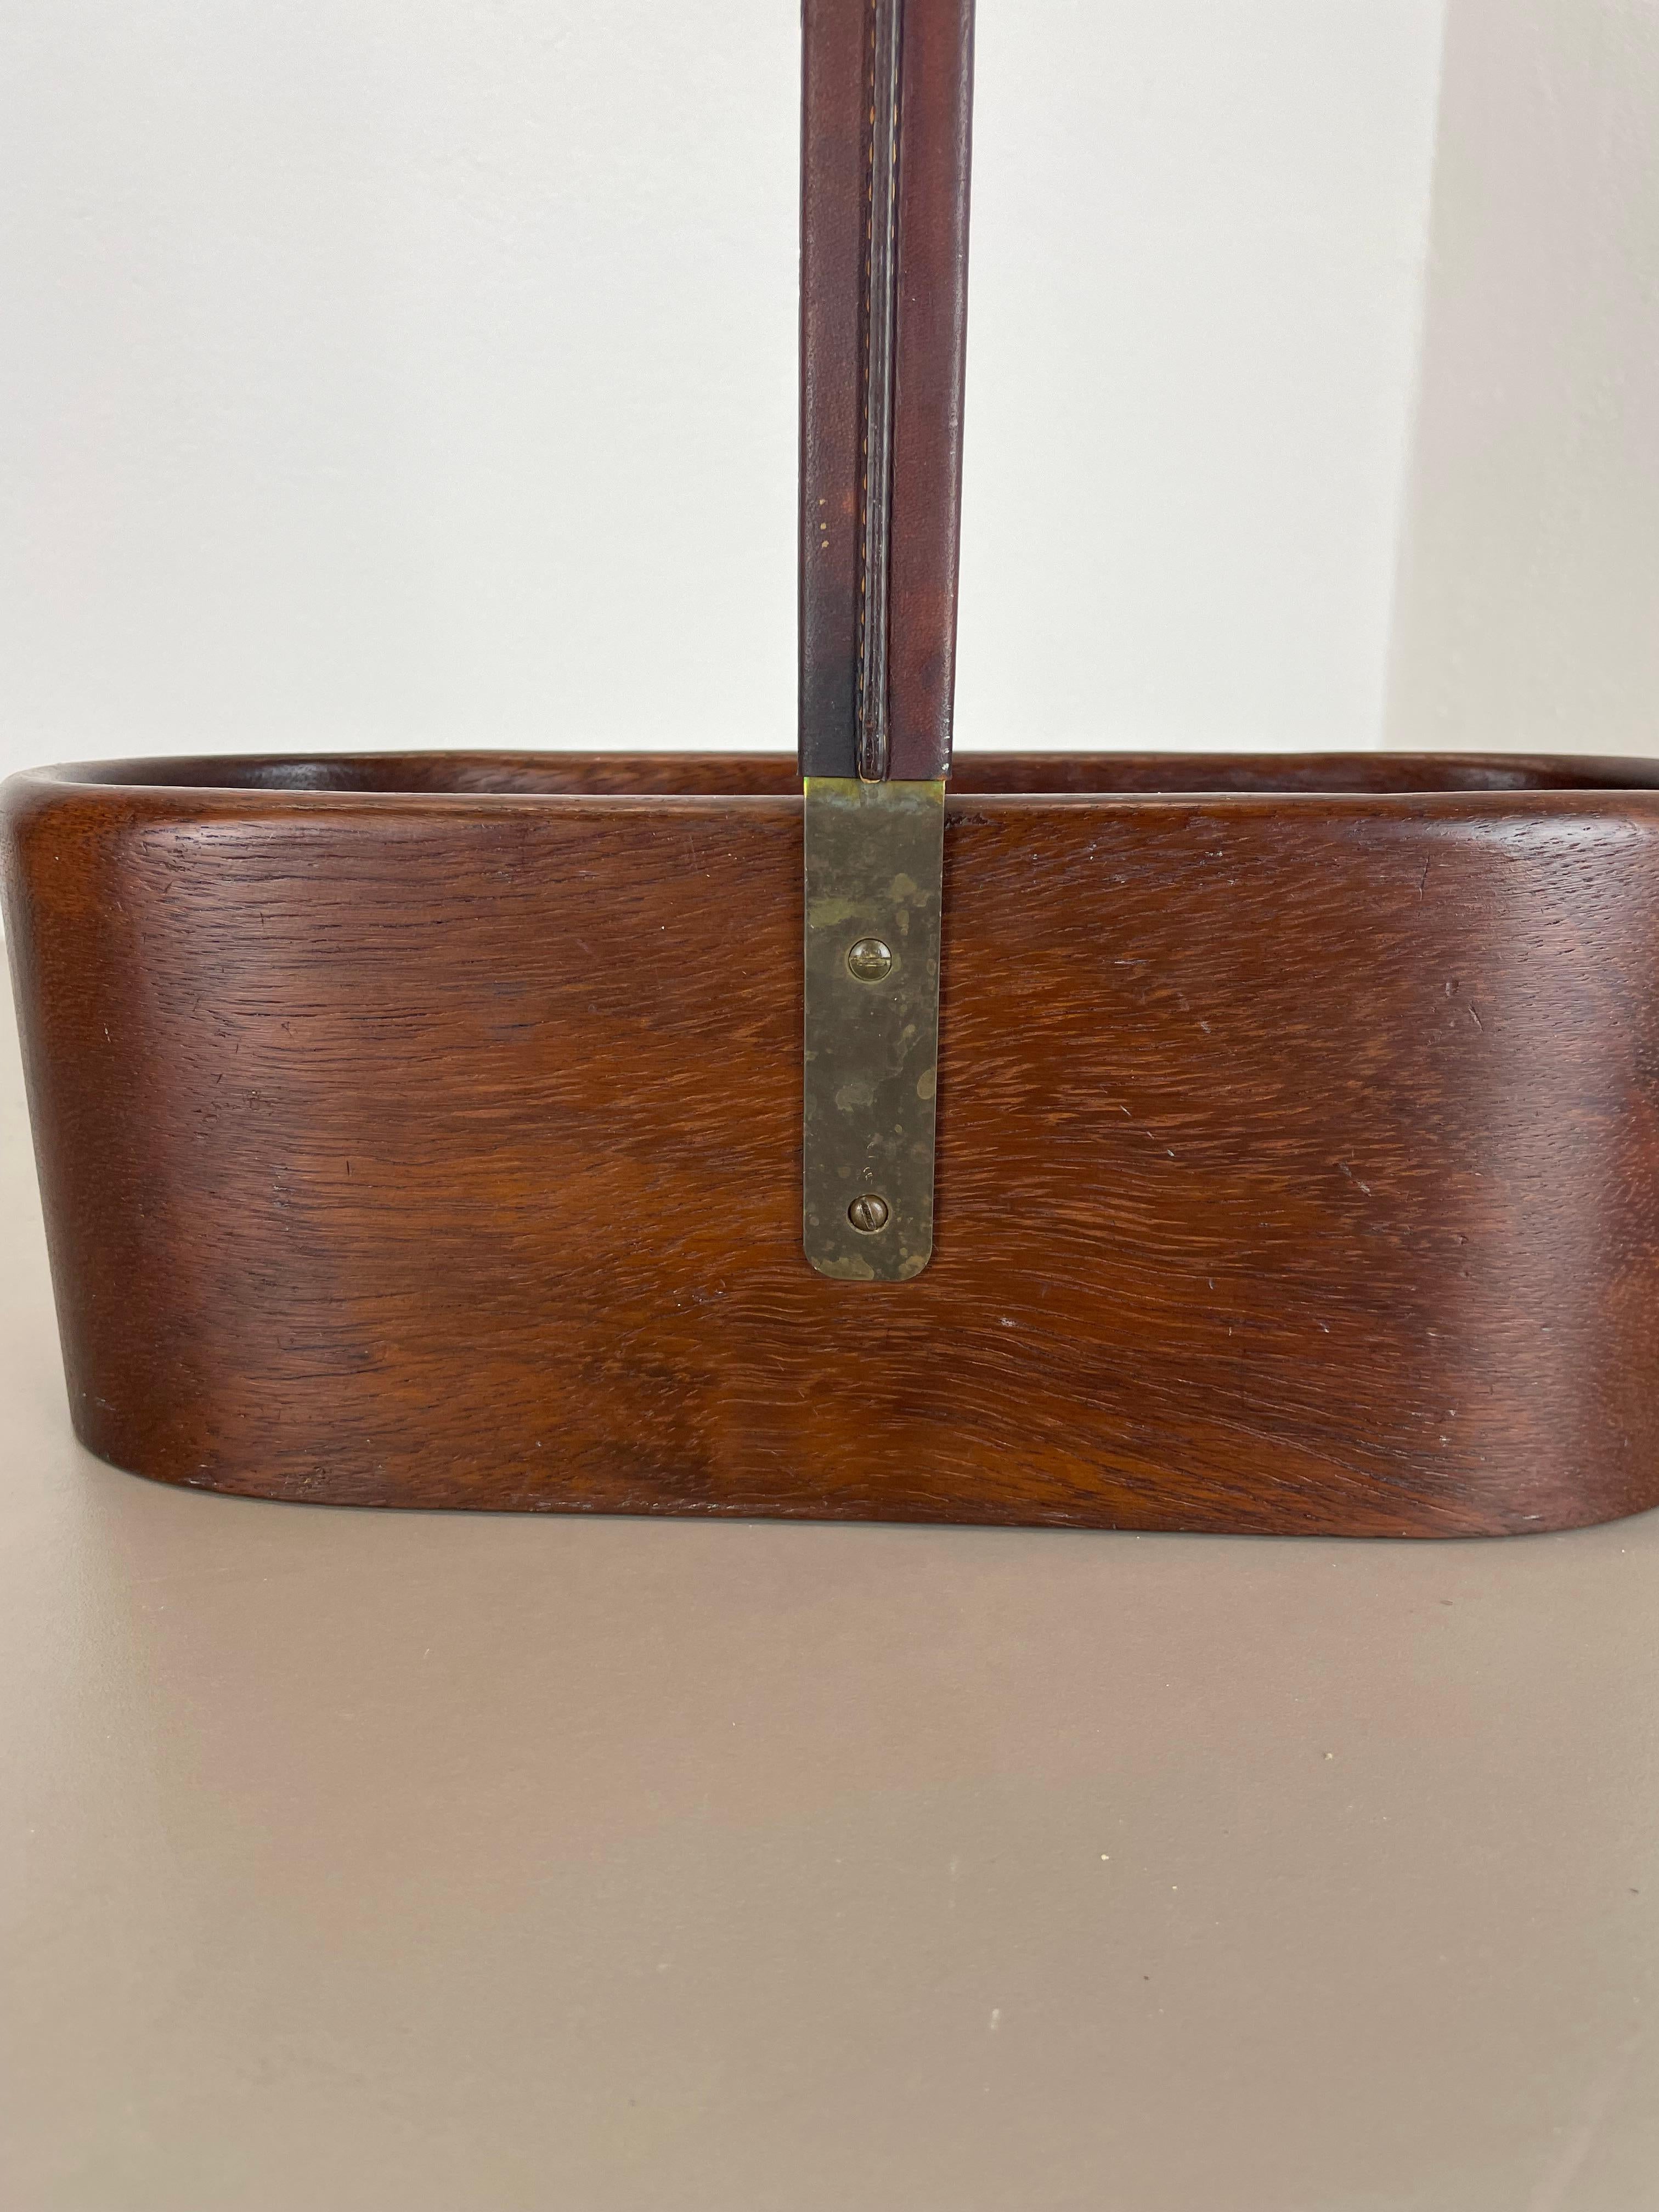 Teak Bottle Holder with Brass and Leather Handle by Carl Auböck, Austria, 1950s For Sale 8